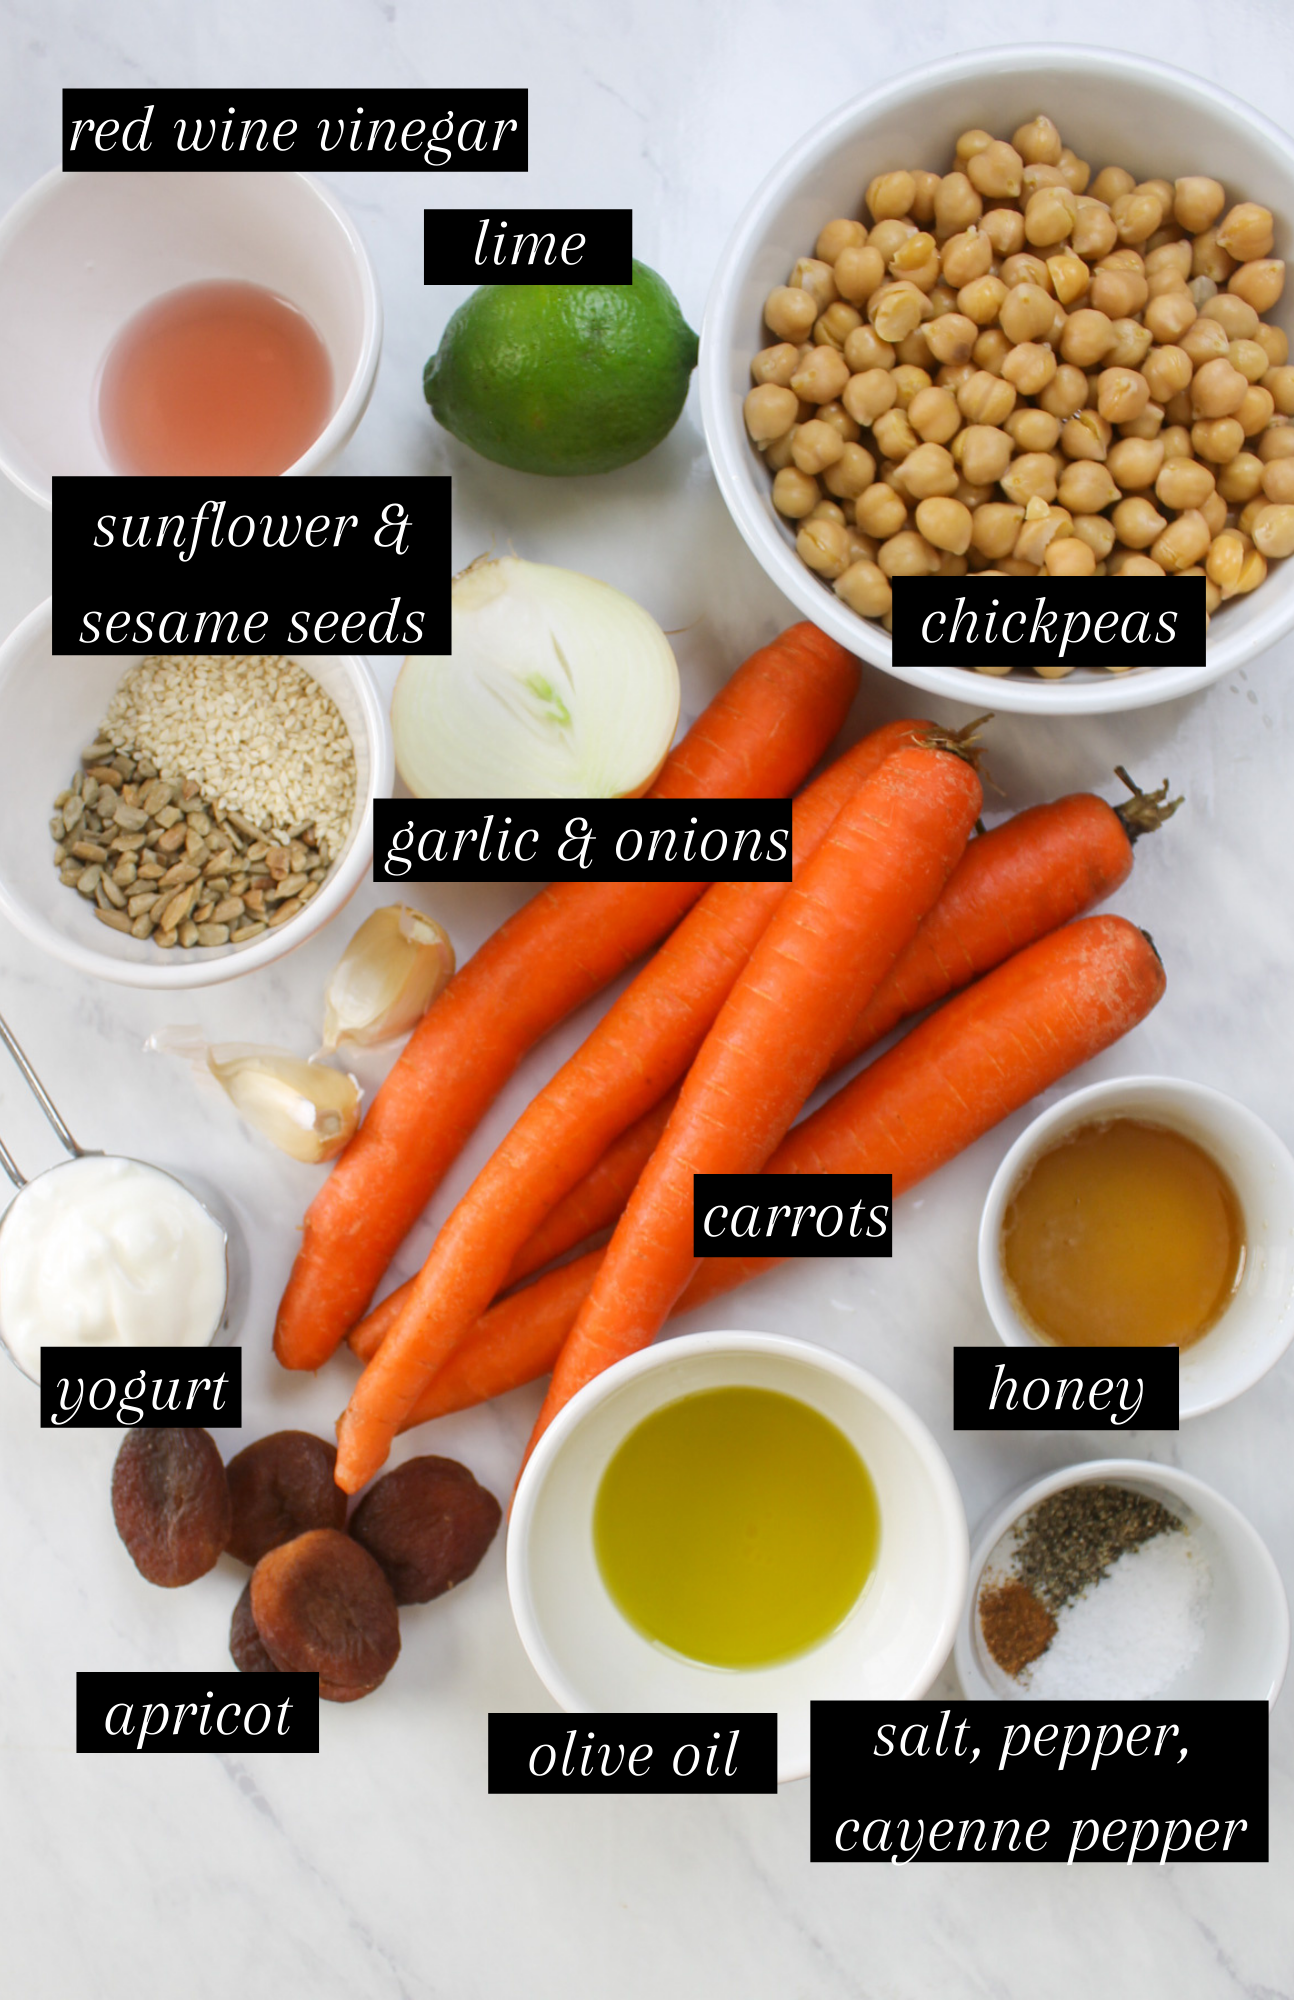 Labeled ingredients for roasted carrot hummus.